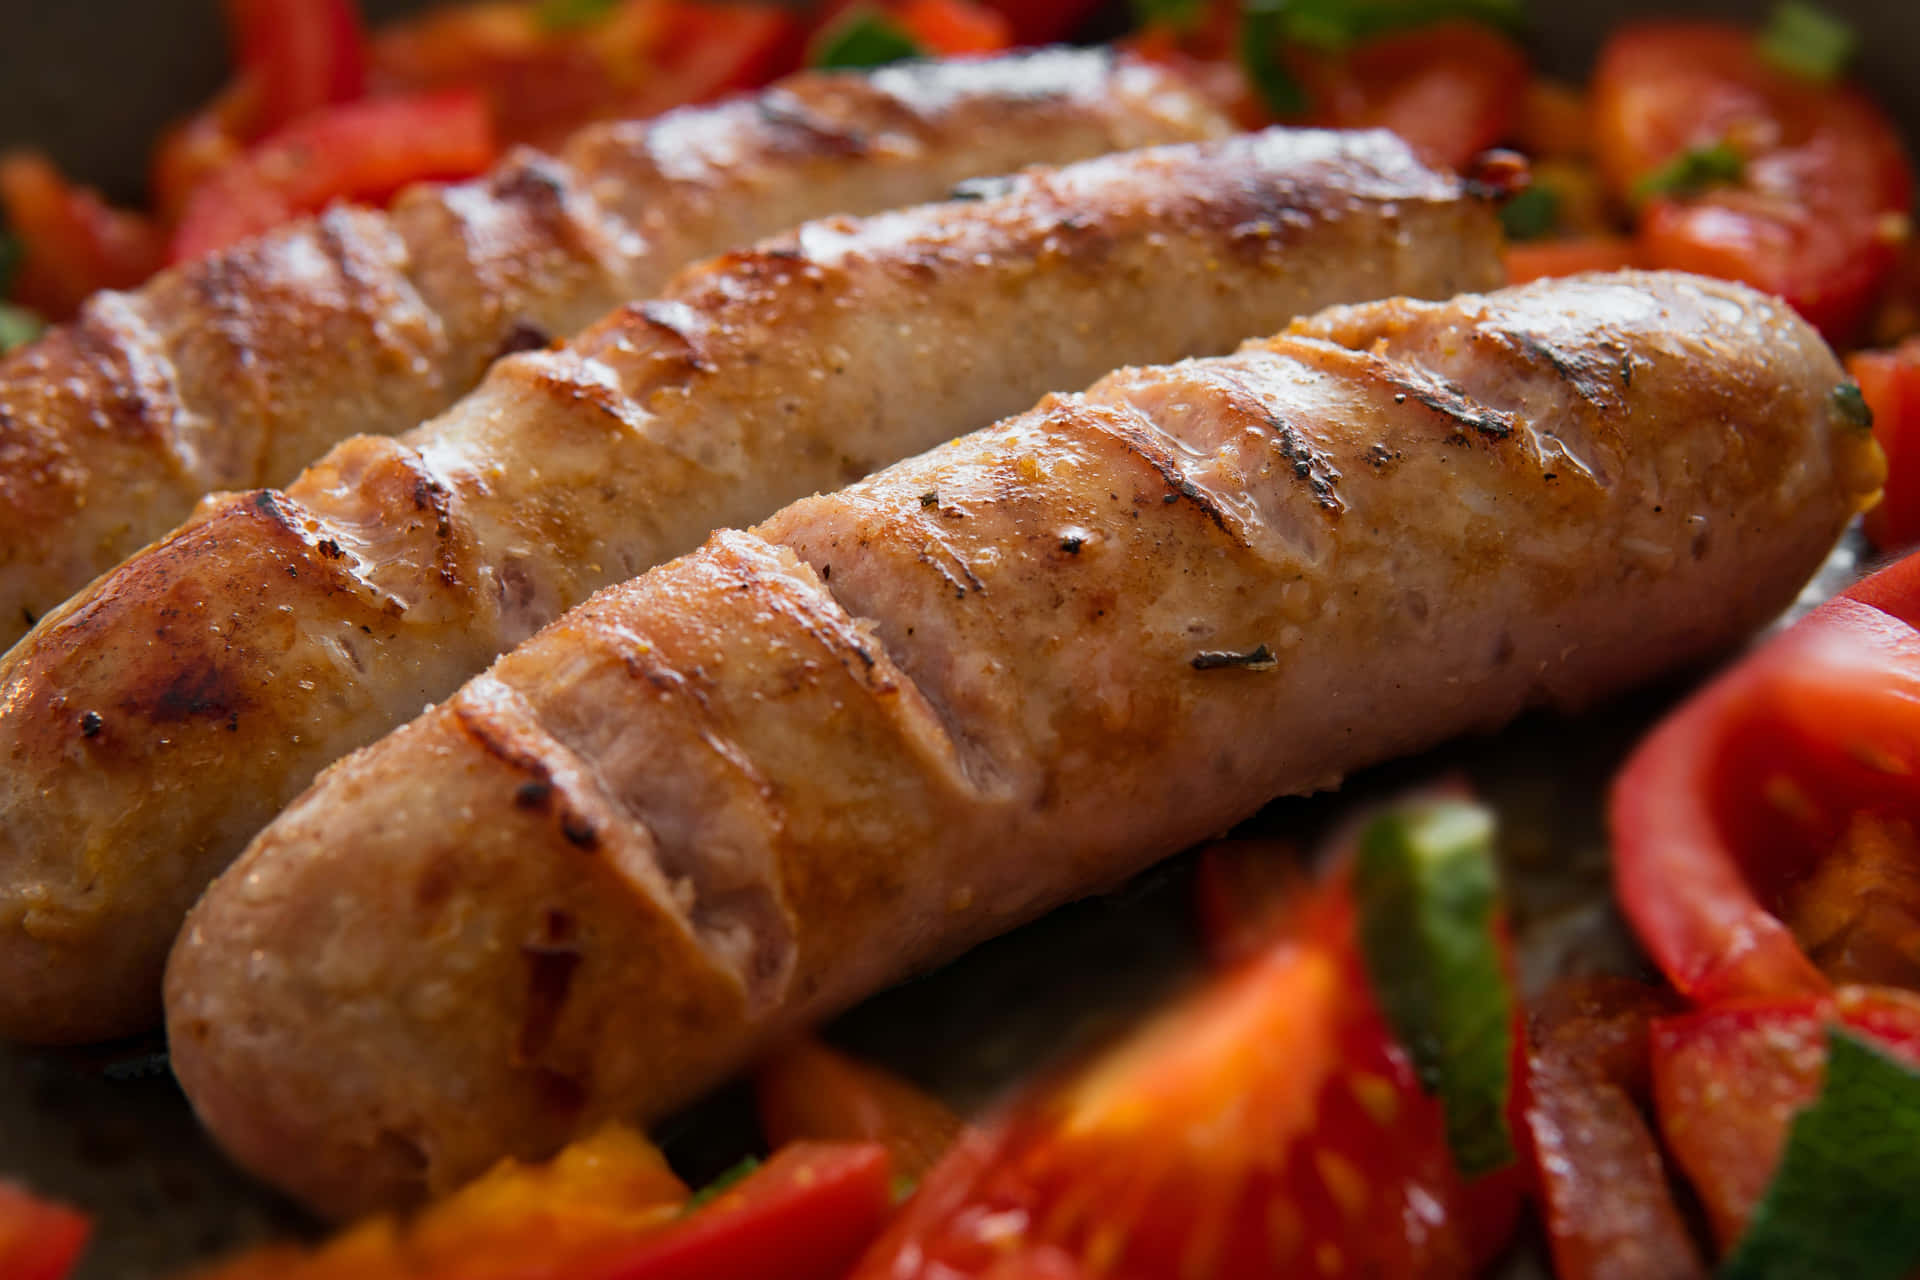 Delicious smoked sausages.